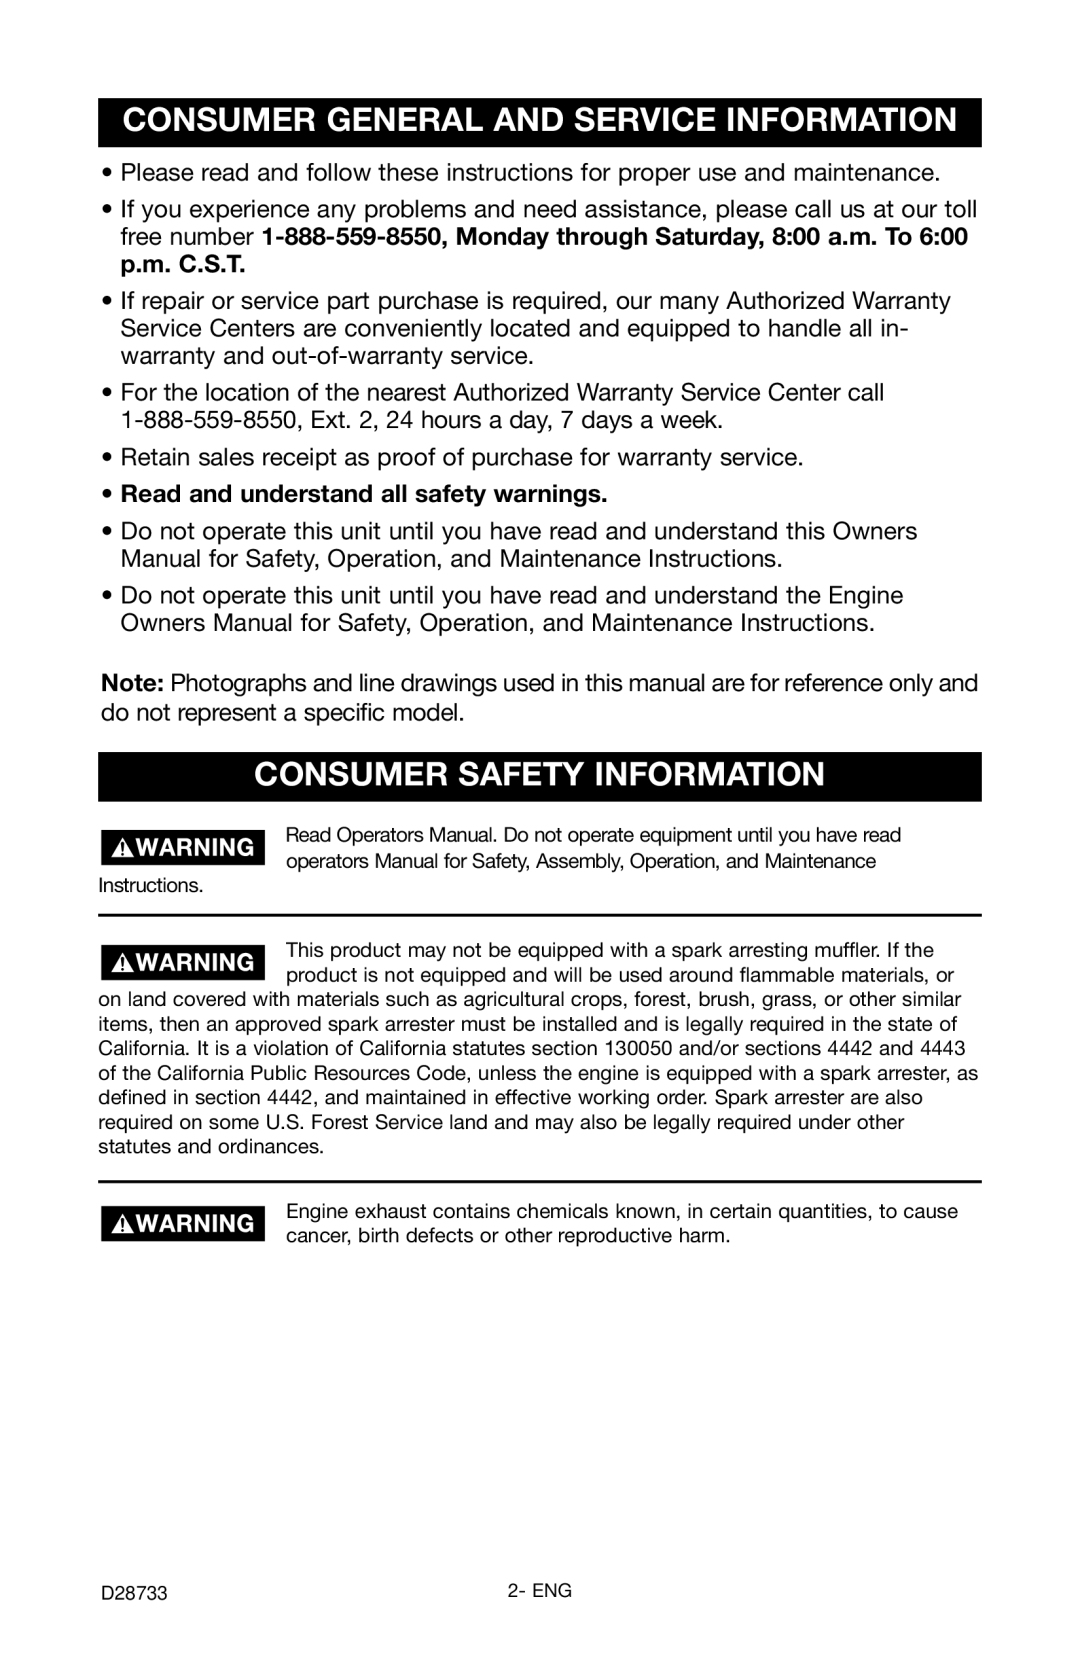 Porter-Cable PGN350, D28733-034-0 instruction manual Consumer General And Service Information, Consumer Safety Information 